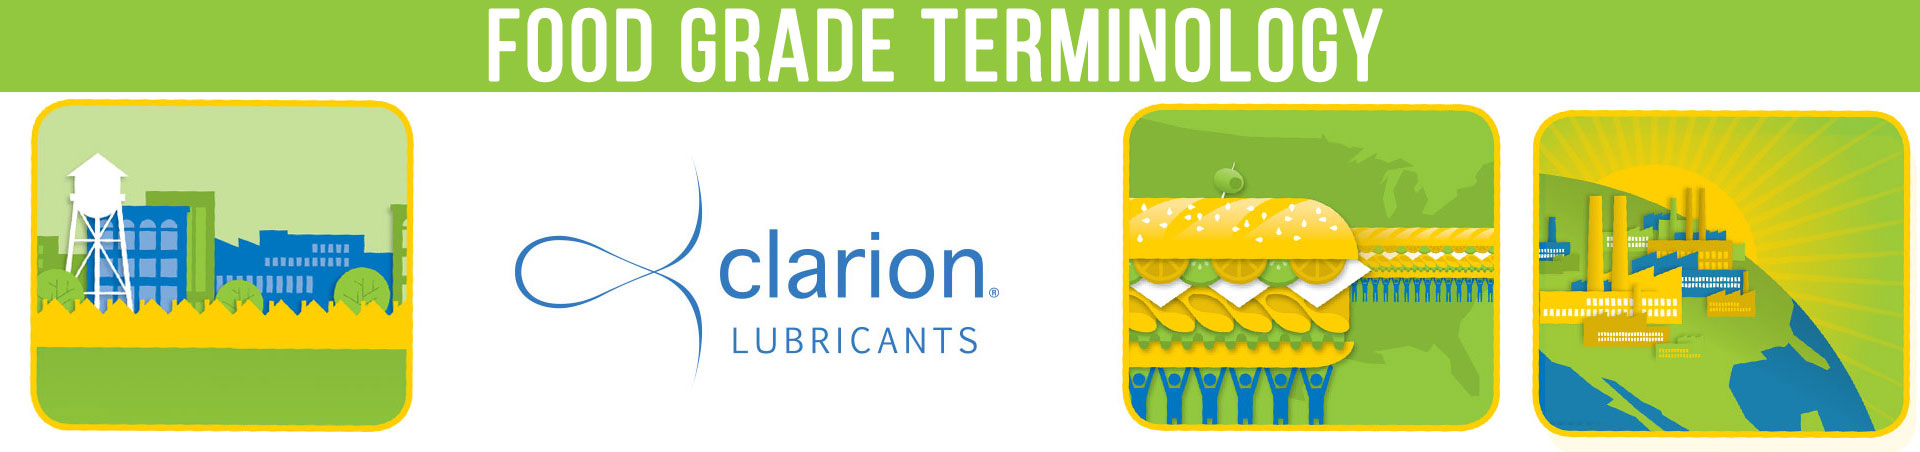 Food-Grade-Terminology-Clarion-Lubricants-Sutton-System-Sales